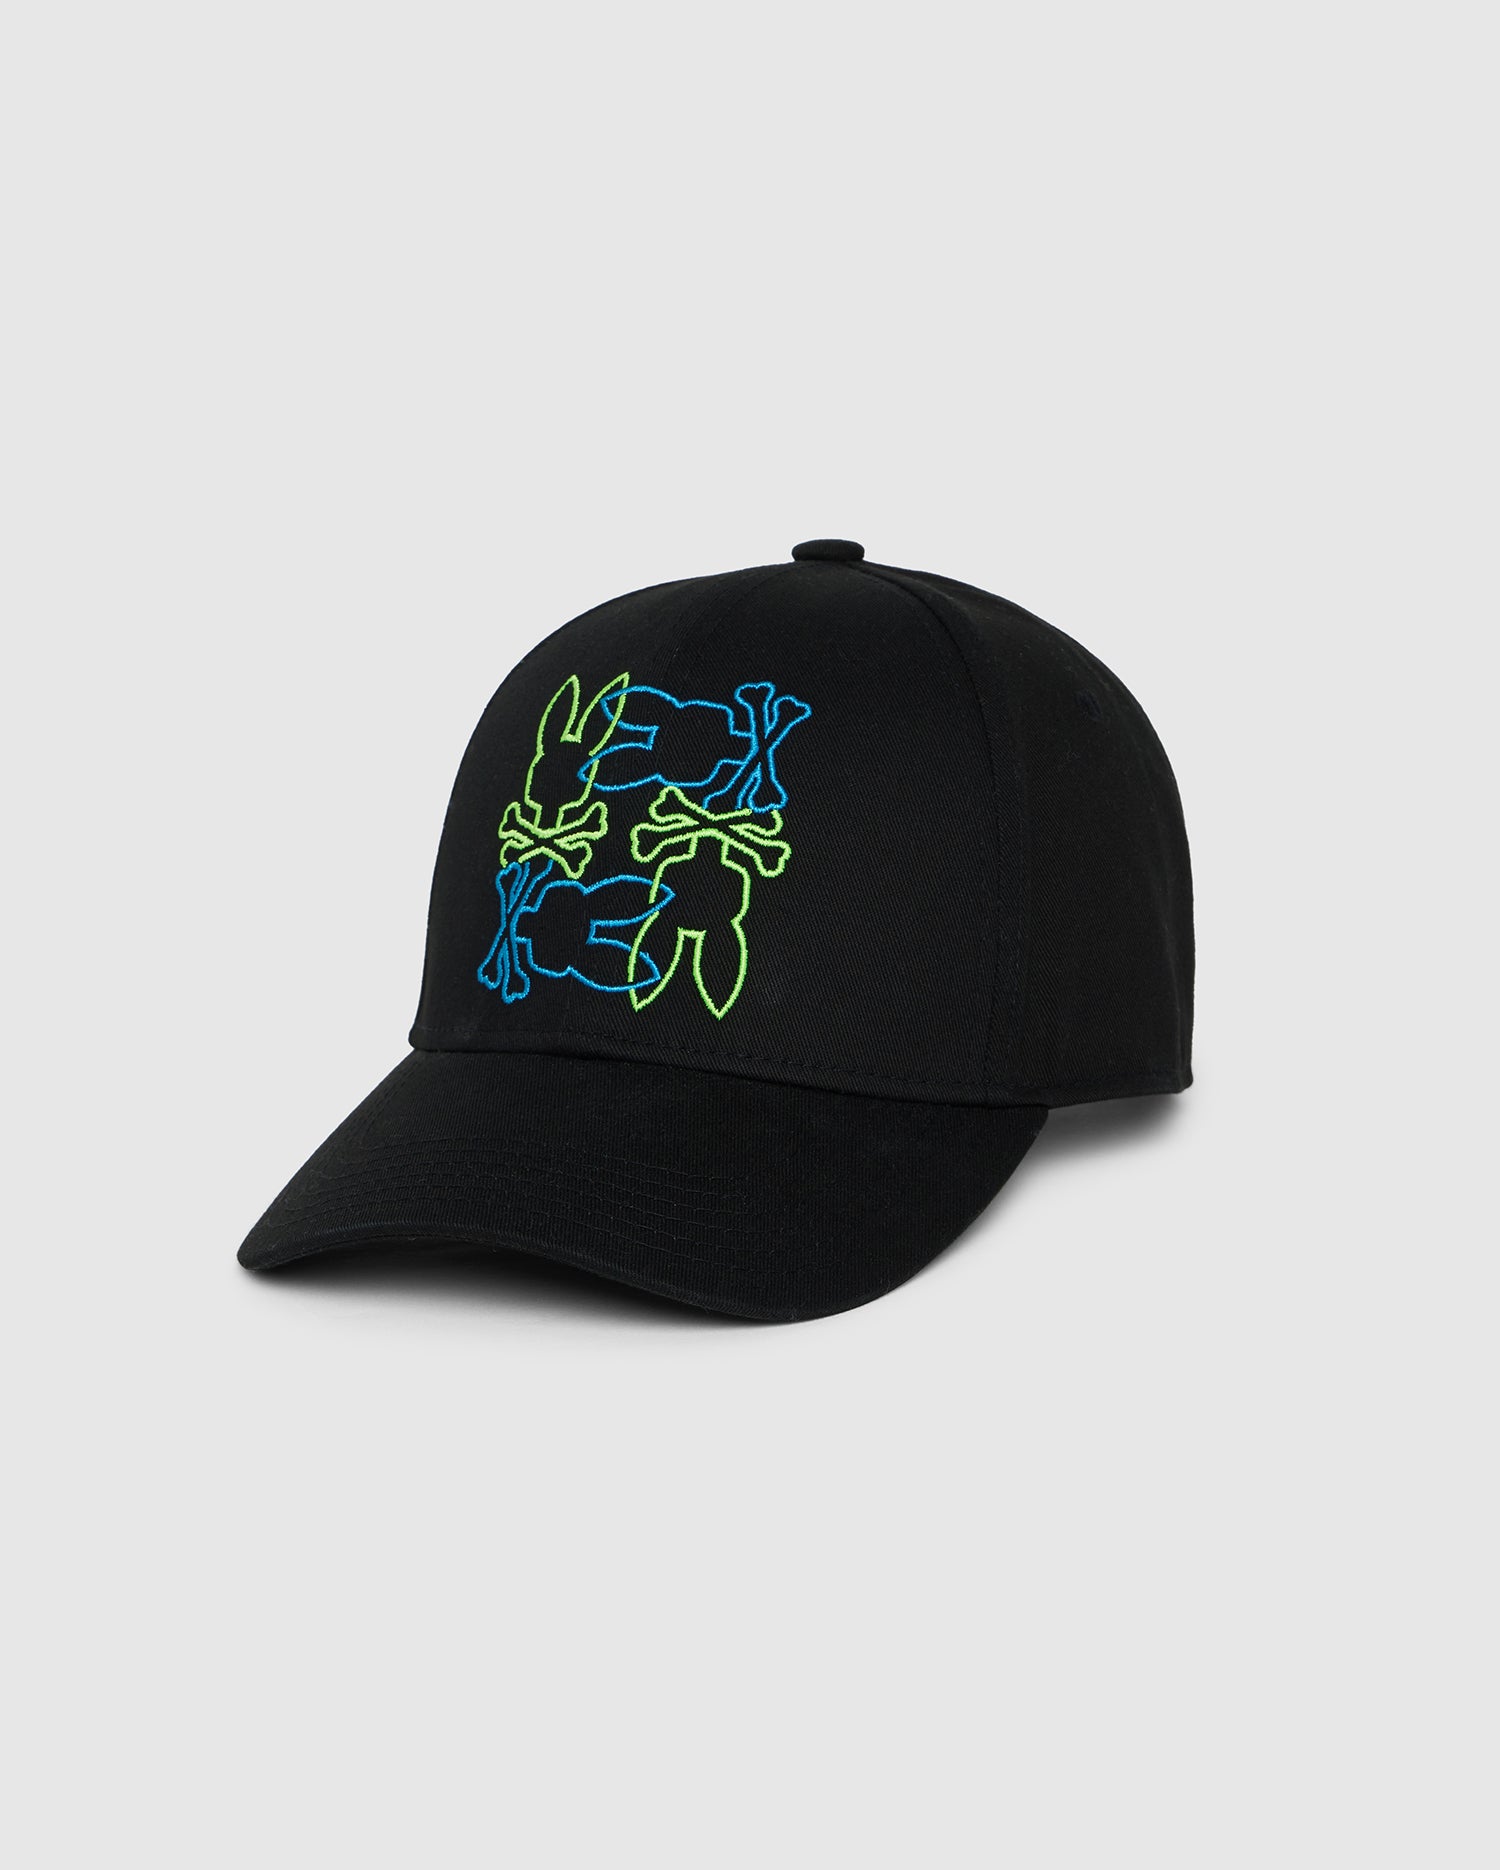 A black MENS RODMAN BASEBALL CAP - B6A124B2HT by Psycho Bunny, the perfect wardrobe accessory, boasts a colorful embroidered design on the front featuring four rabbits in blue, green, and light blue, arranged in a mirrored pattern. This stylish headgear has a curved brim and is positioned against a plain gray background.